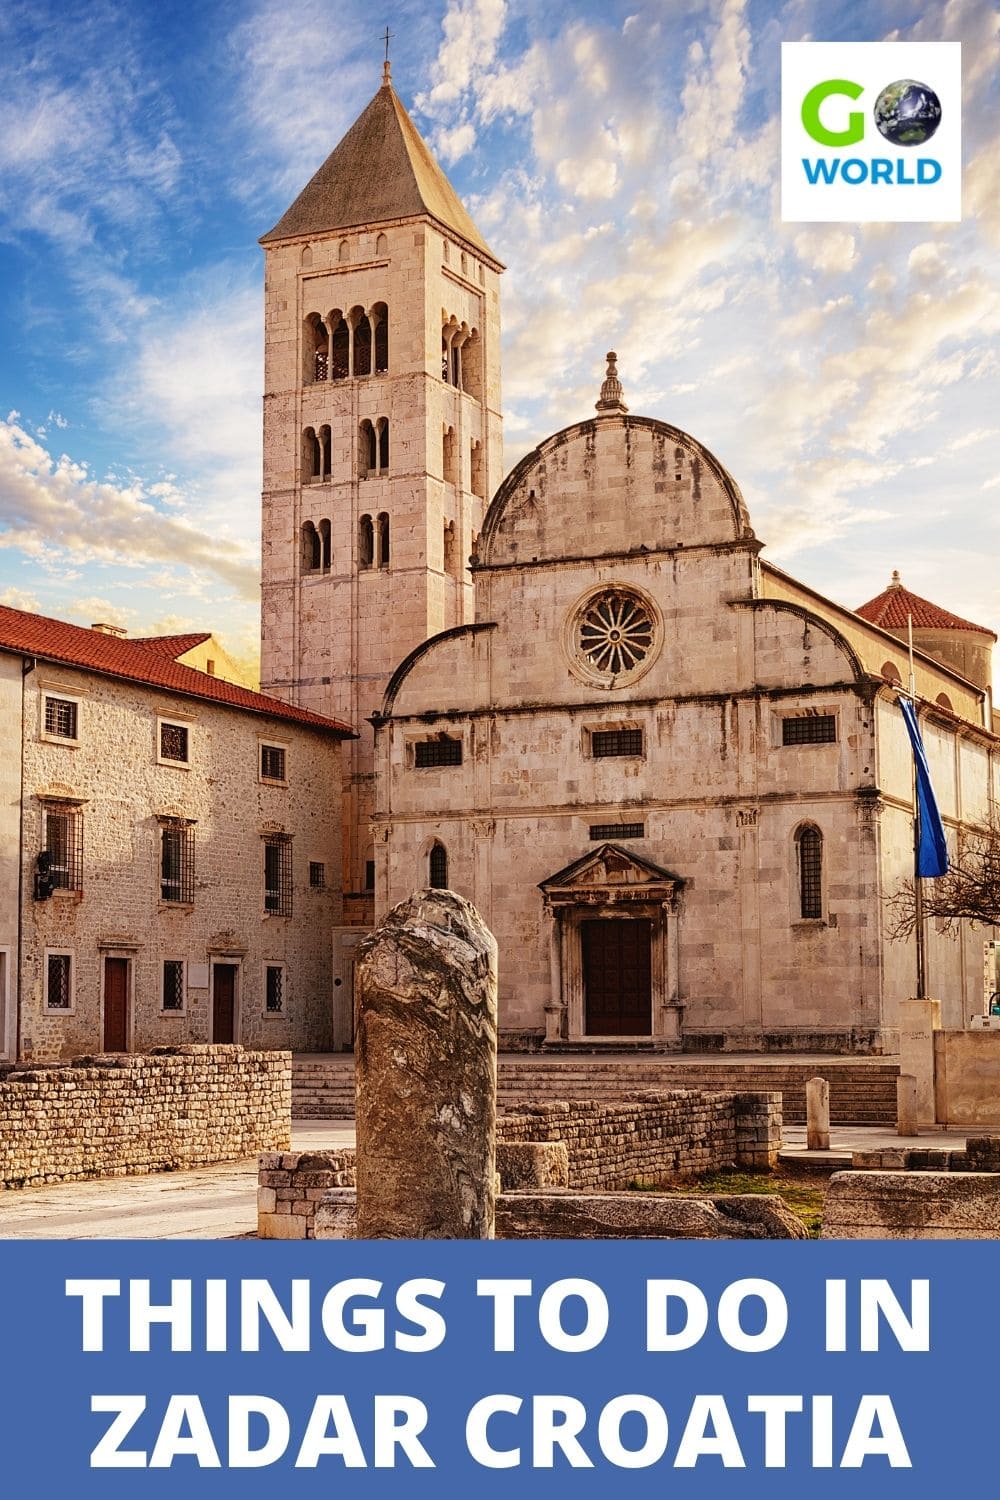 Often overlooked in favor of Dubrovnik or Split, there are many things to do in Zadar Croatia that should be added to your European bucketlist. #zadarcroatia #thingstodoinzadar